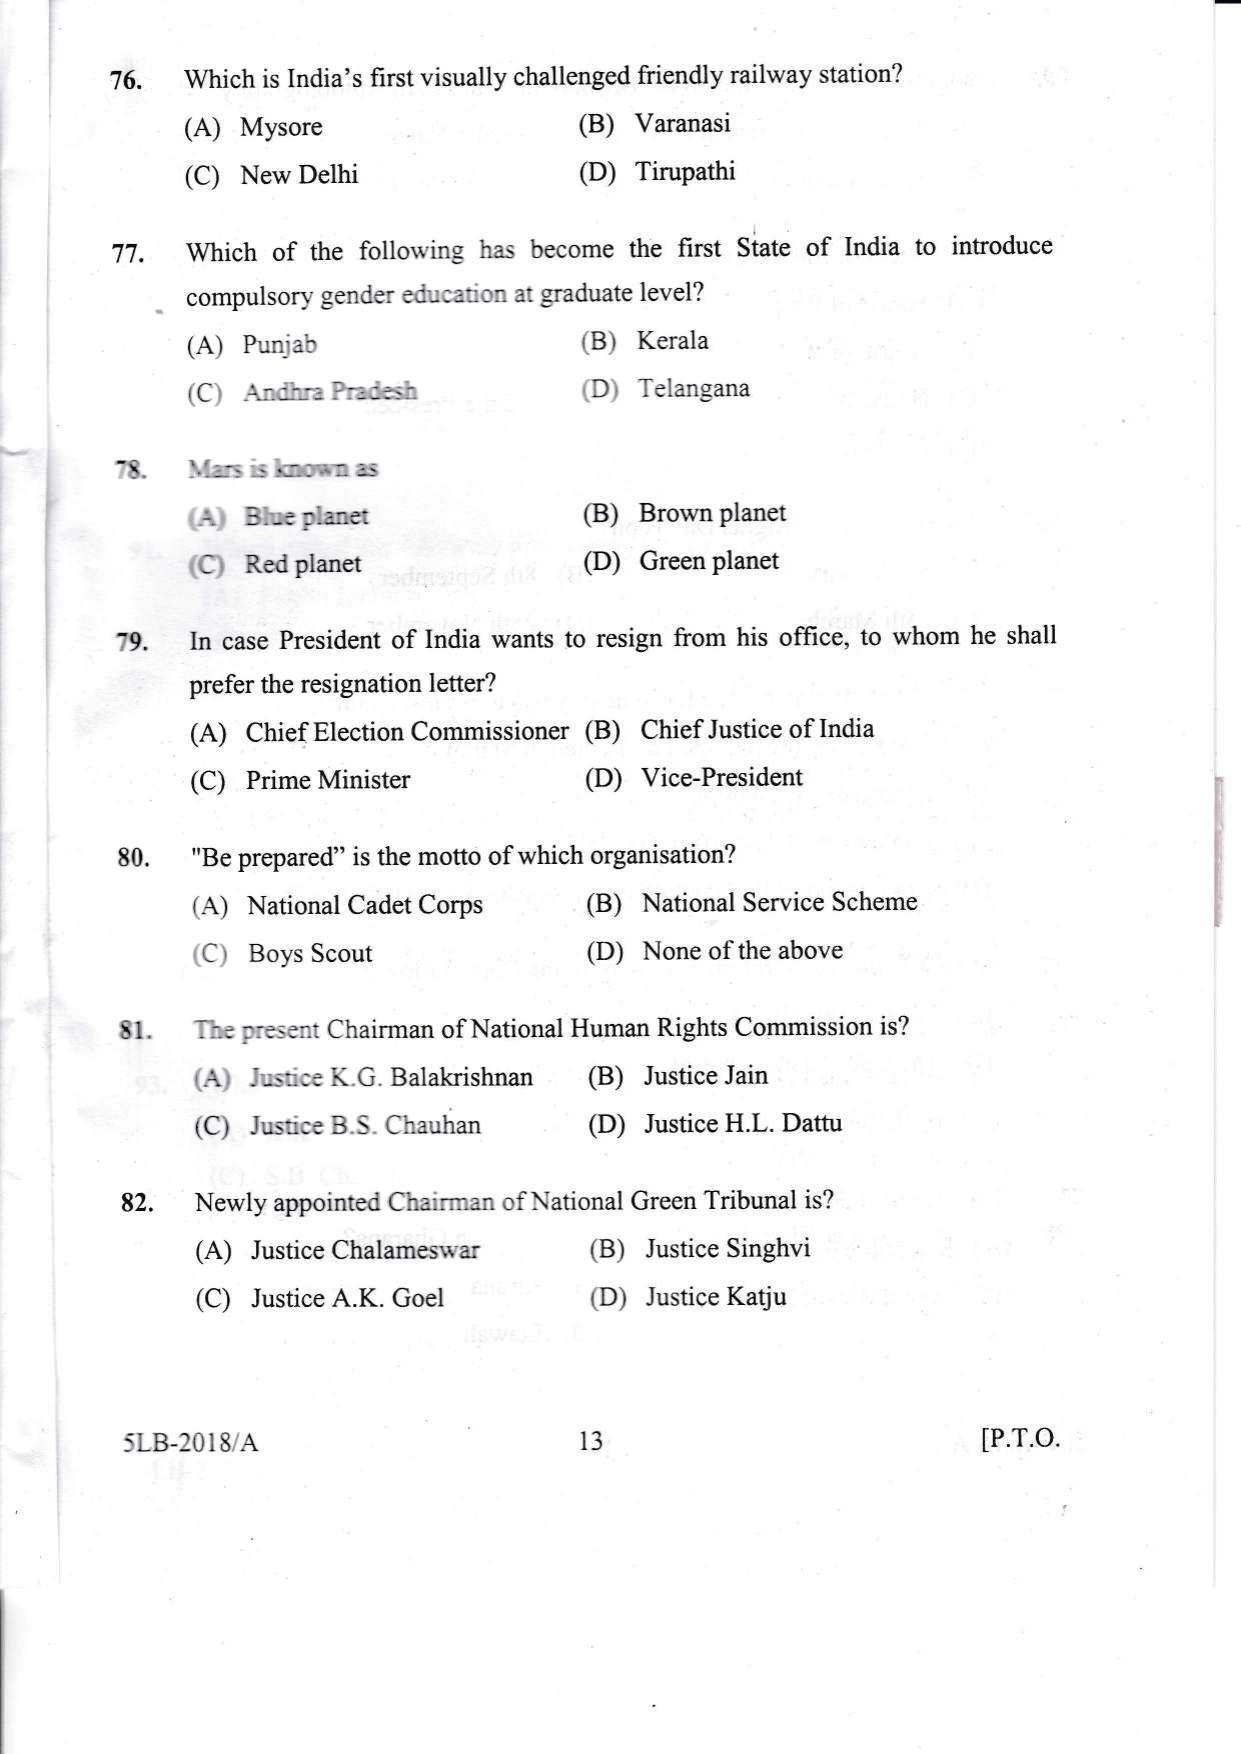 KLEE 5 Year LLB Exam 2018 Question Paper - Page 13